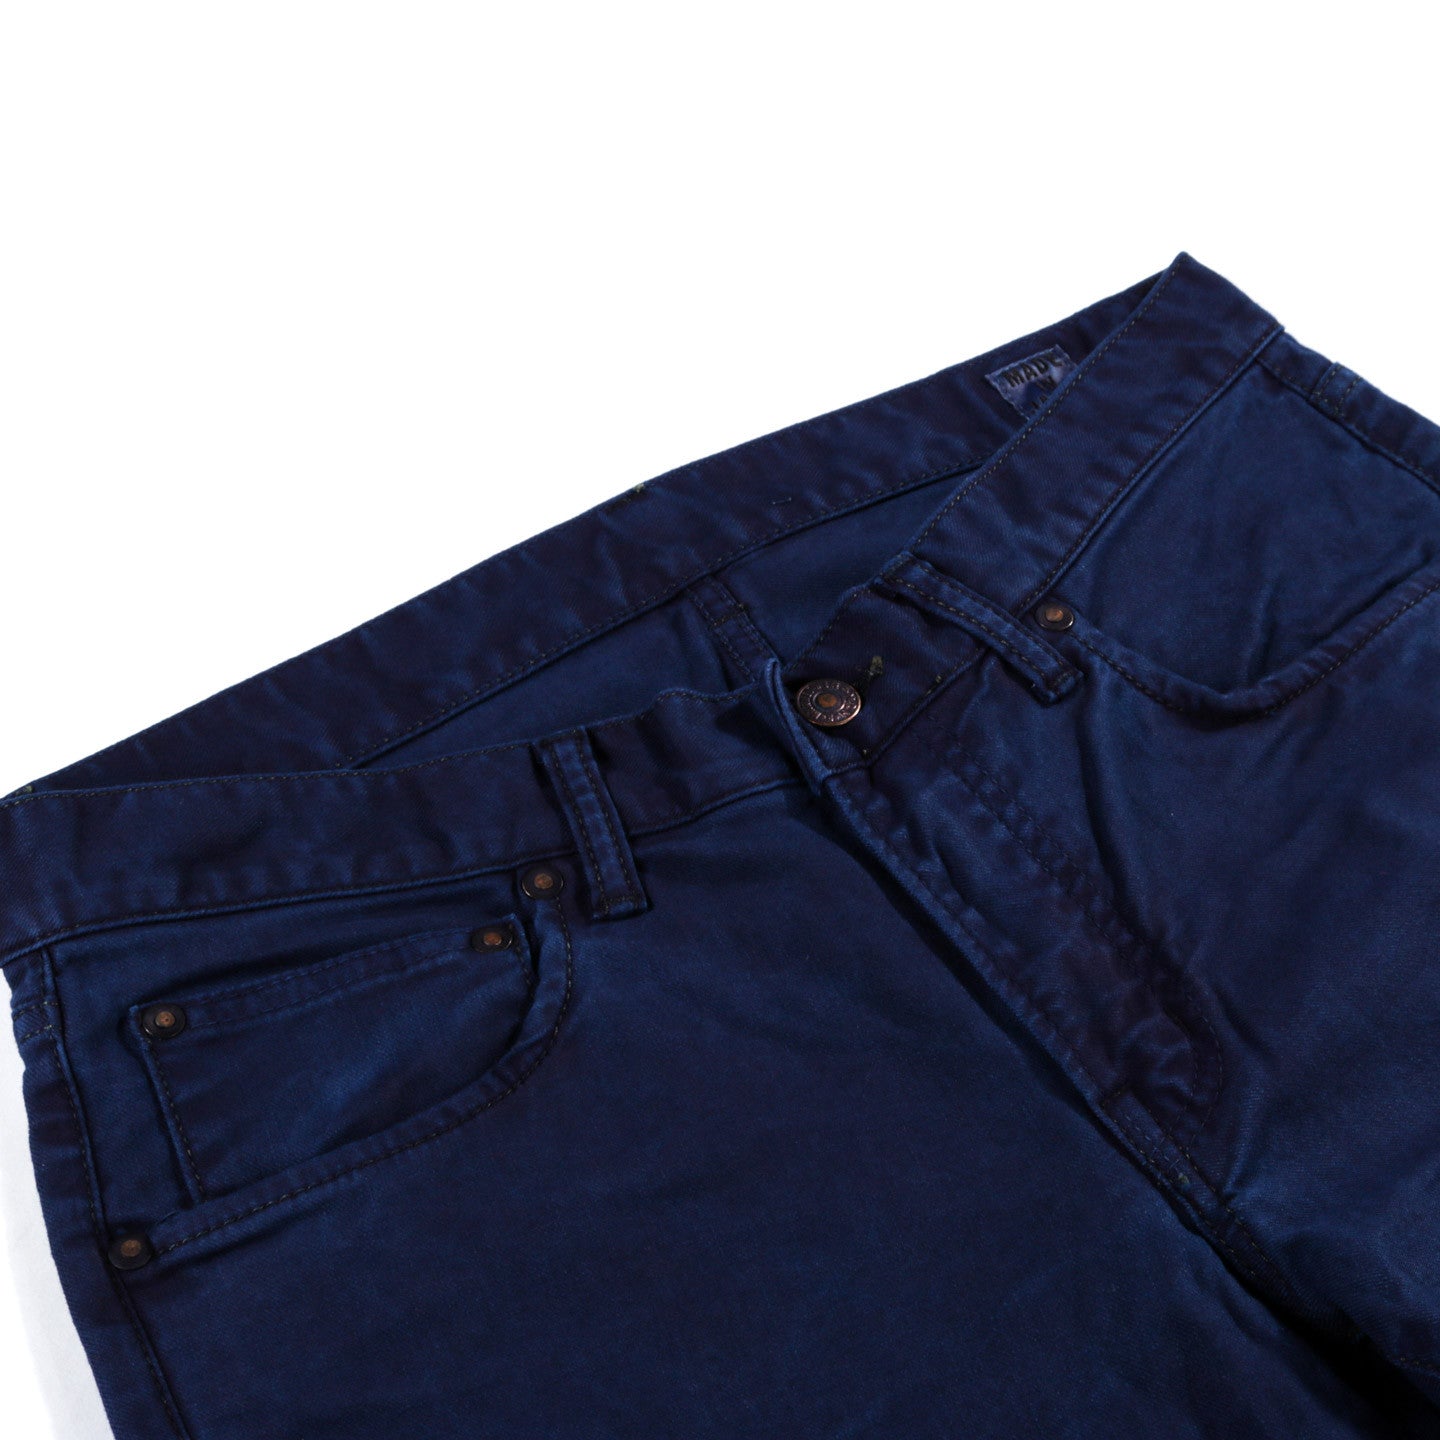 BLUE BLUE JAPAN STRETCH TWILL HAND DYED JEAN